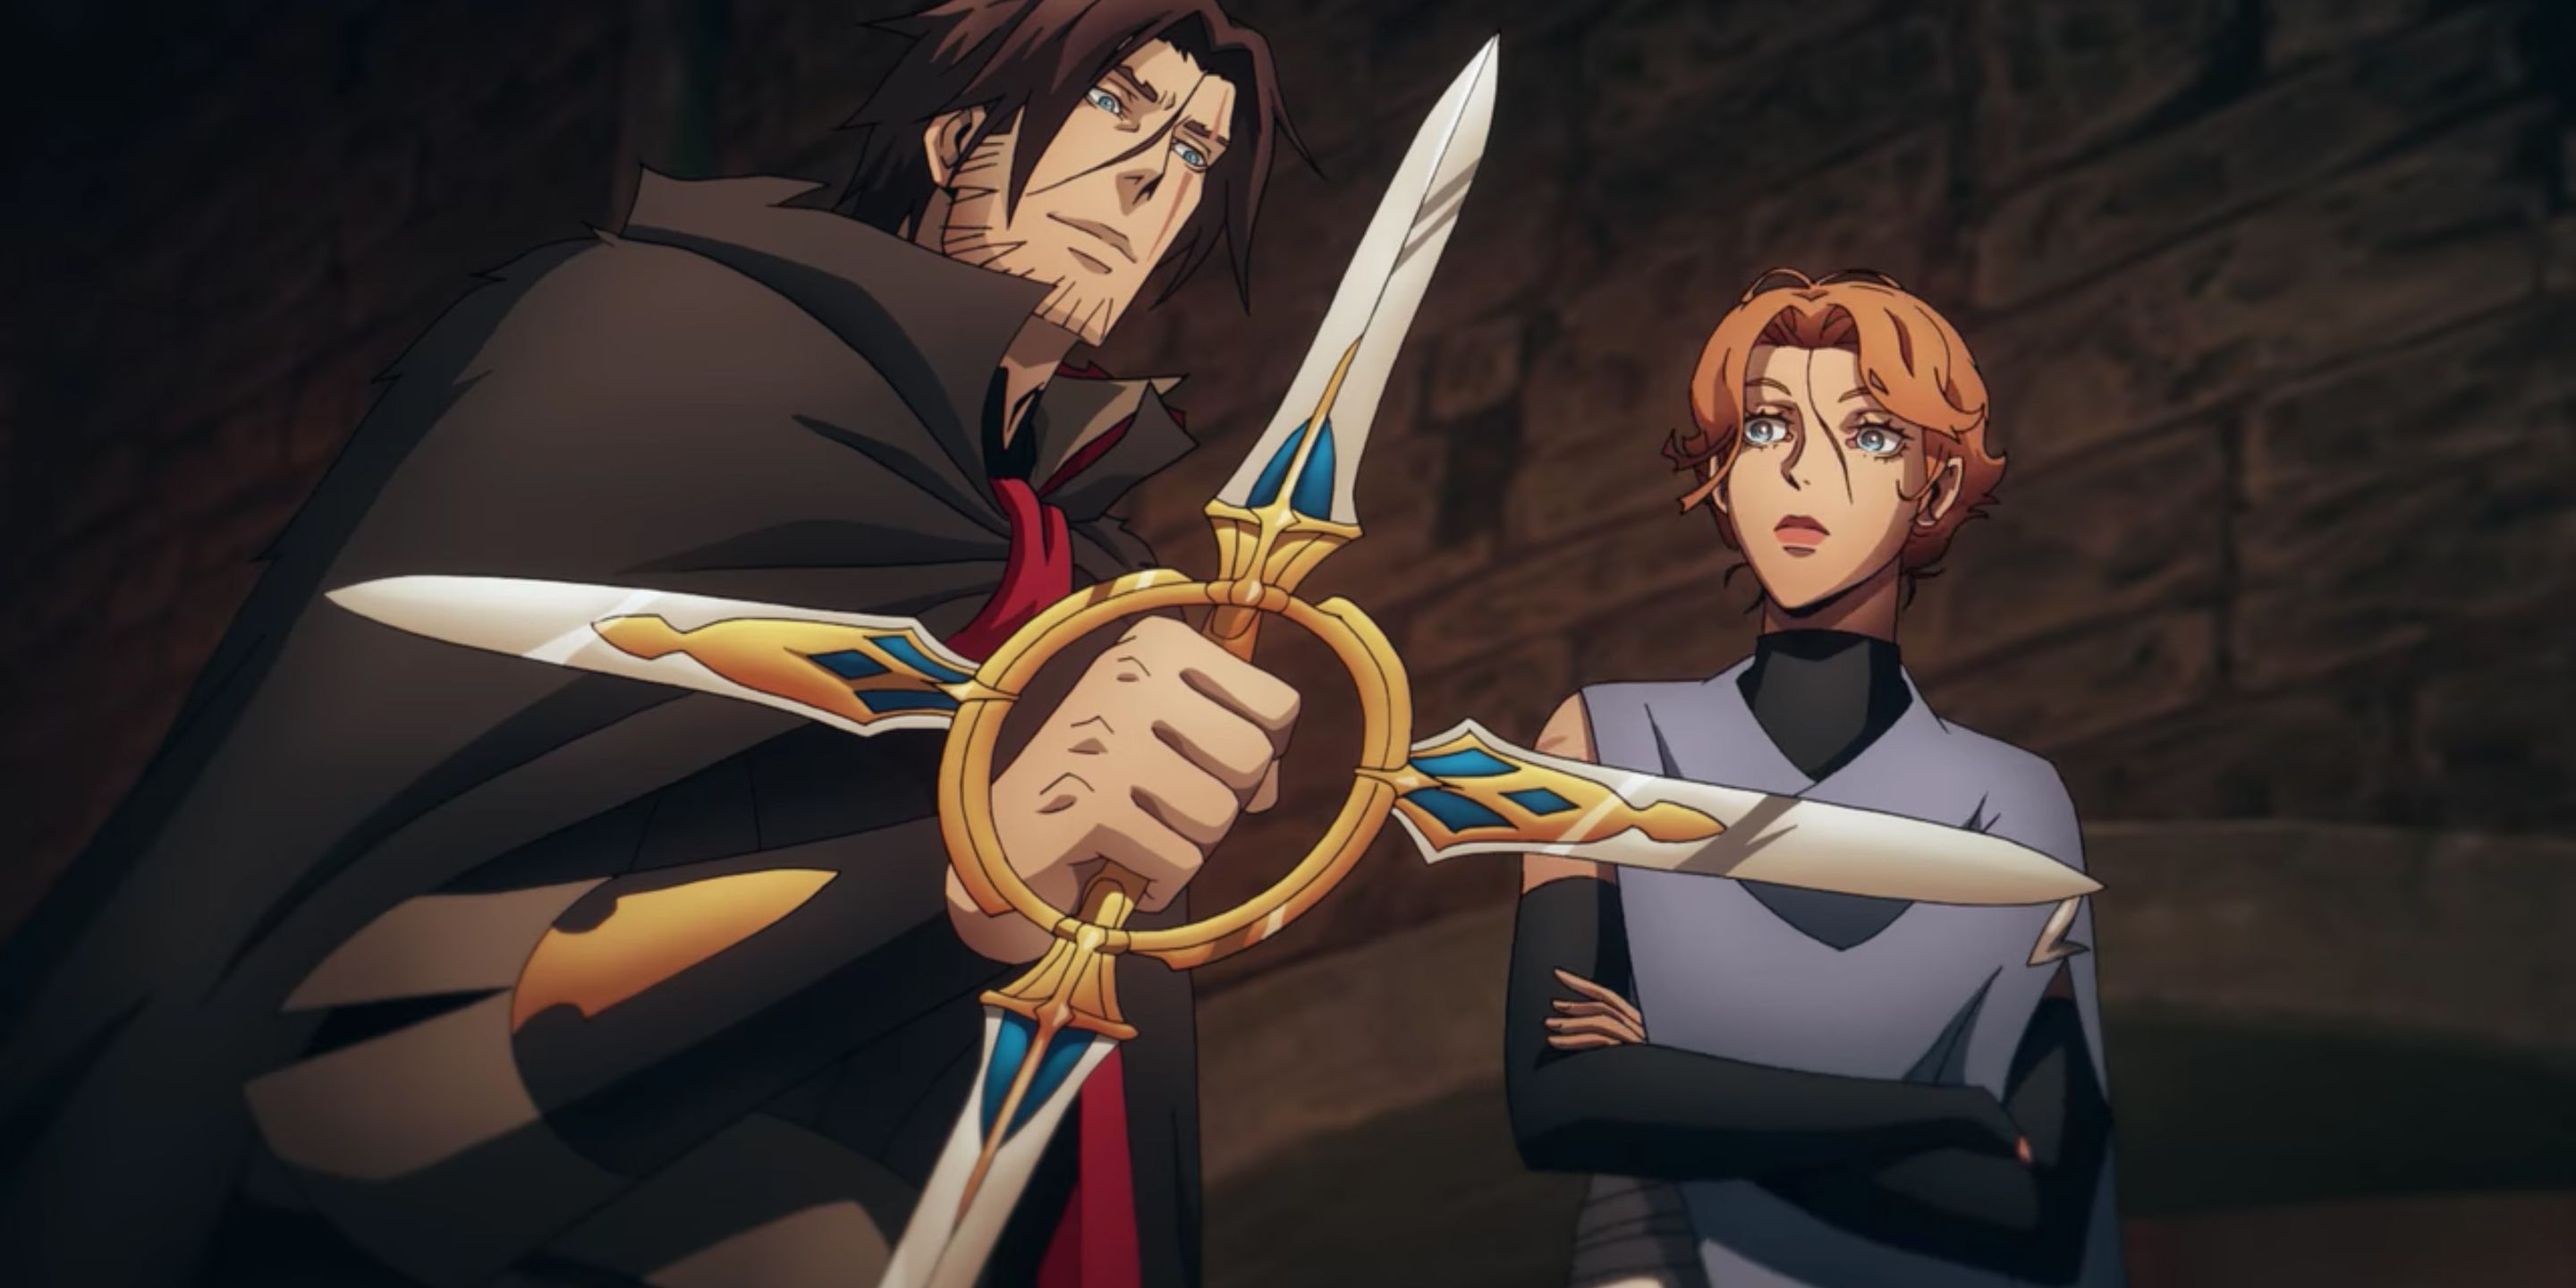 Sypha and Trevor with Combat Cross Castlevania